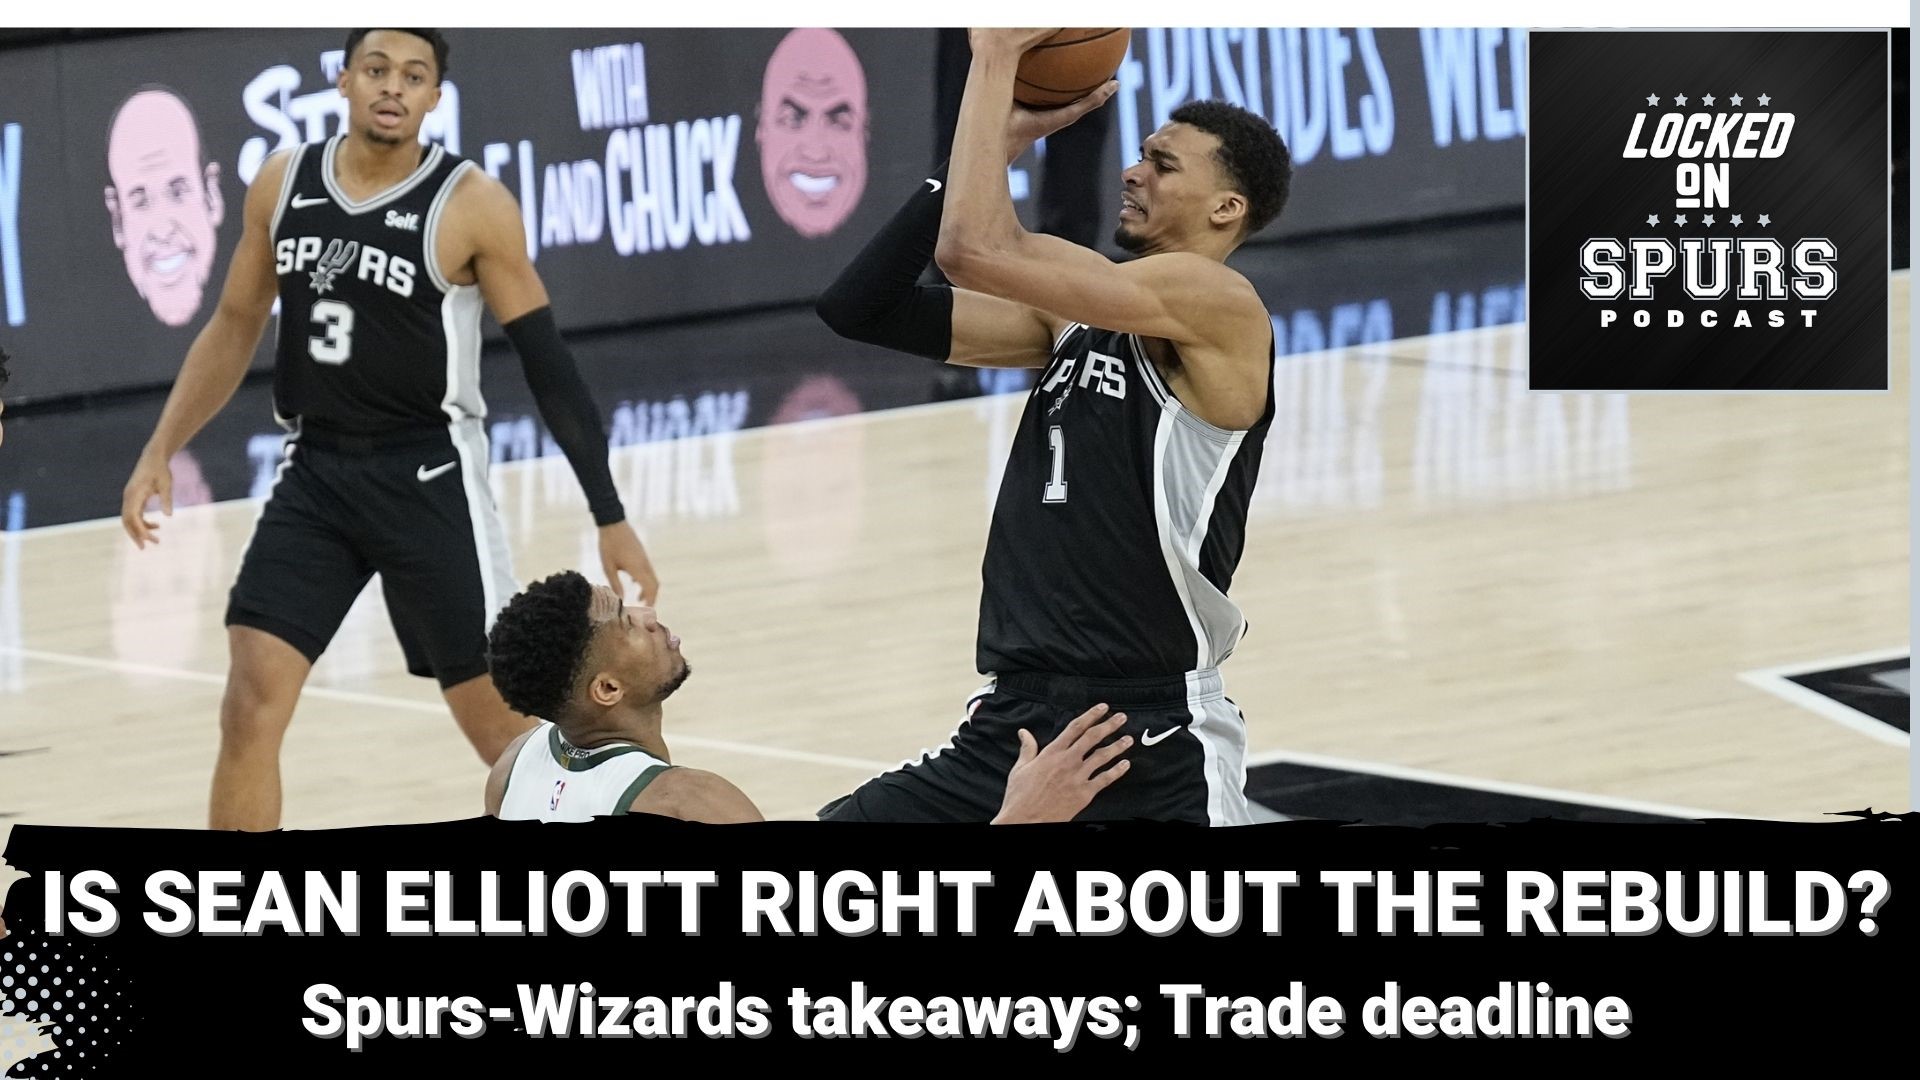 Also, takeaway from the Spurs' loss to the Wizards and more.